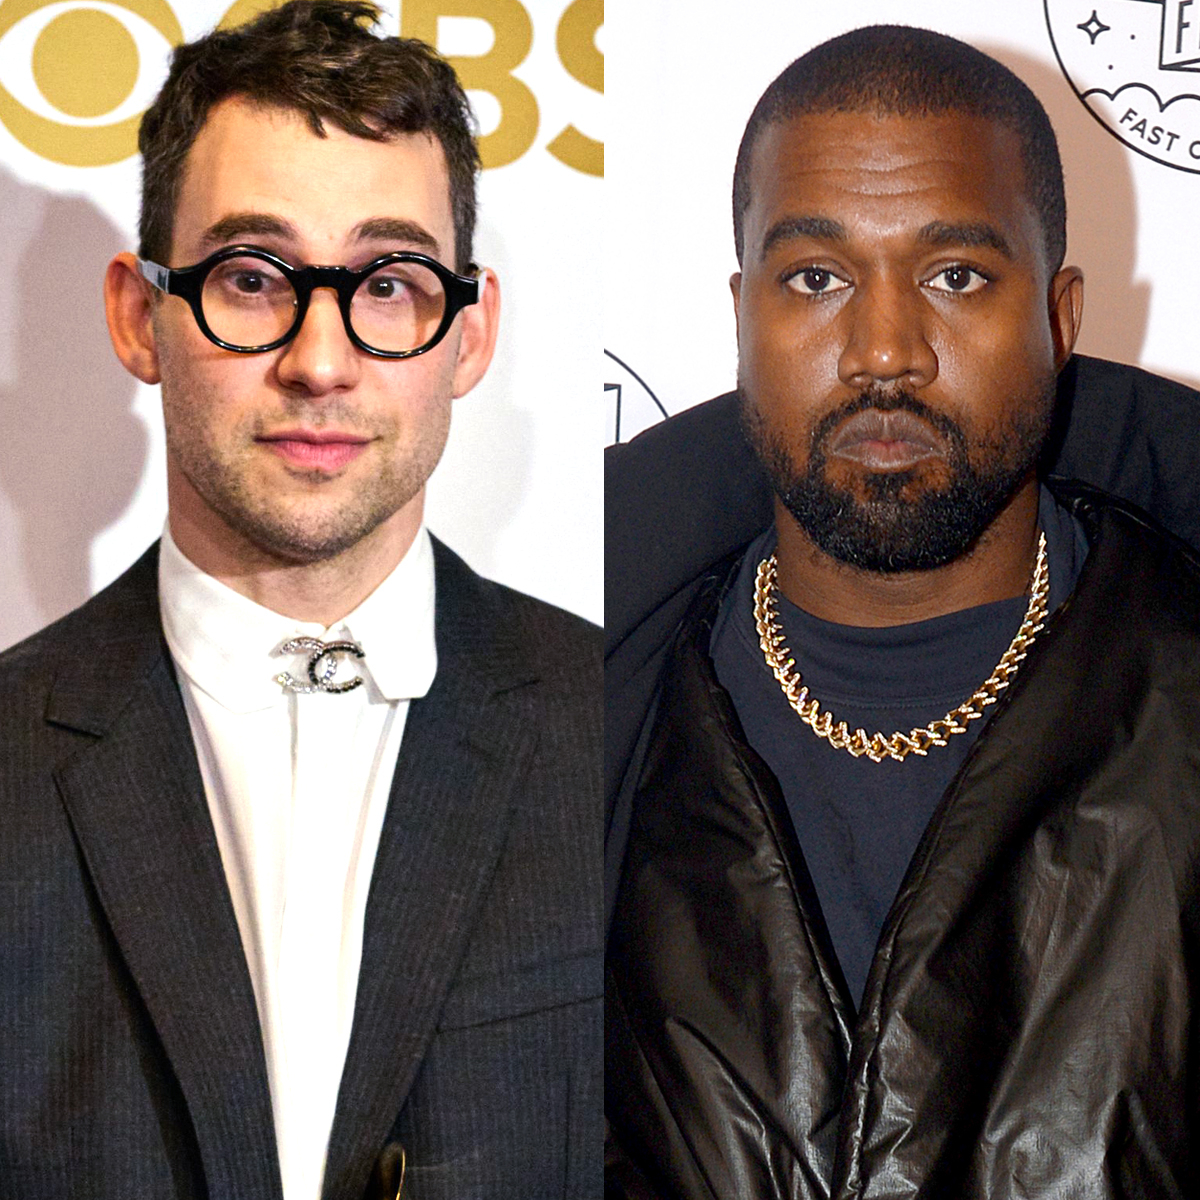 When someone doesn't have the sauce anymore, they go elsewhere to shock”:  Jack Antonoff criticises Kanye West